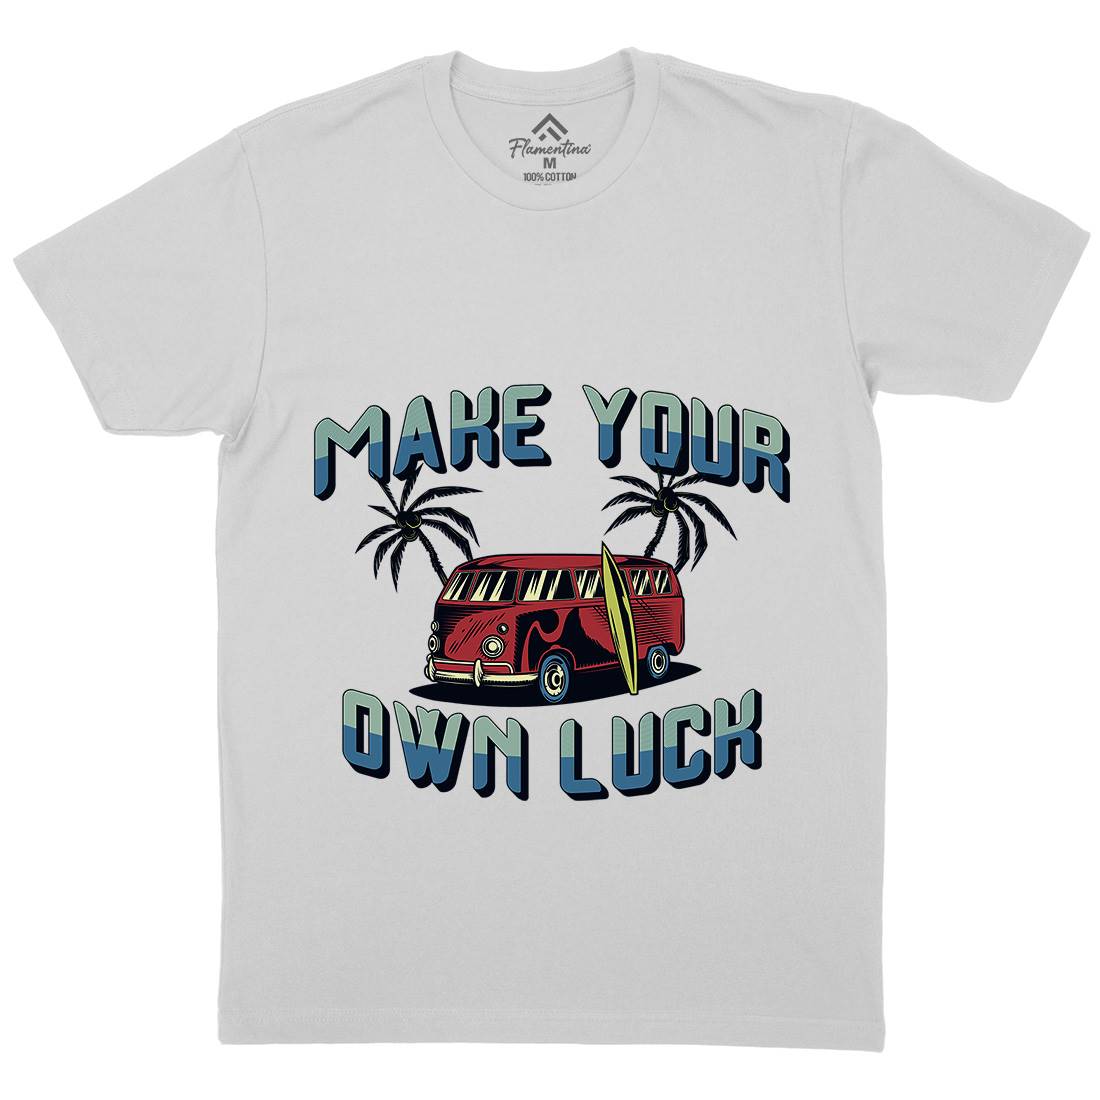 Make Your Own Luck Mens Crew Neck T-Shirt Nature B307